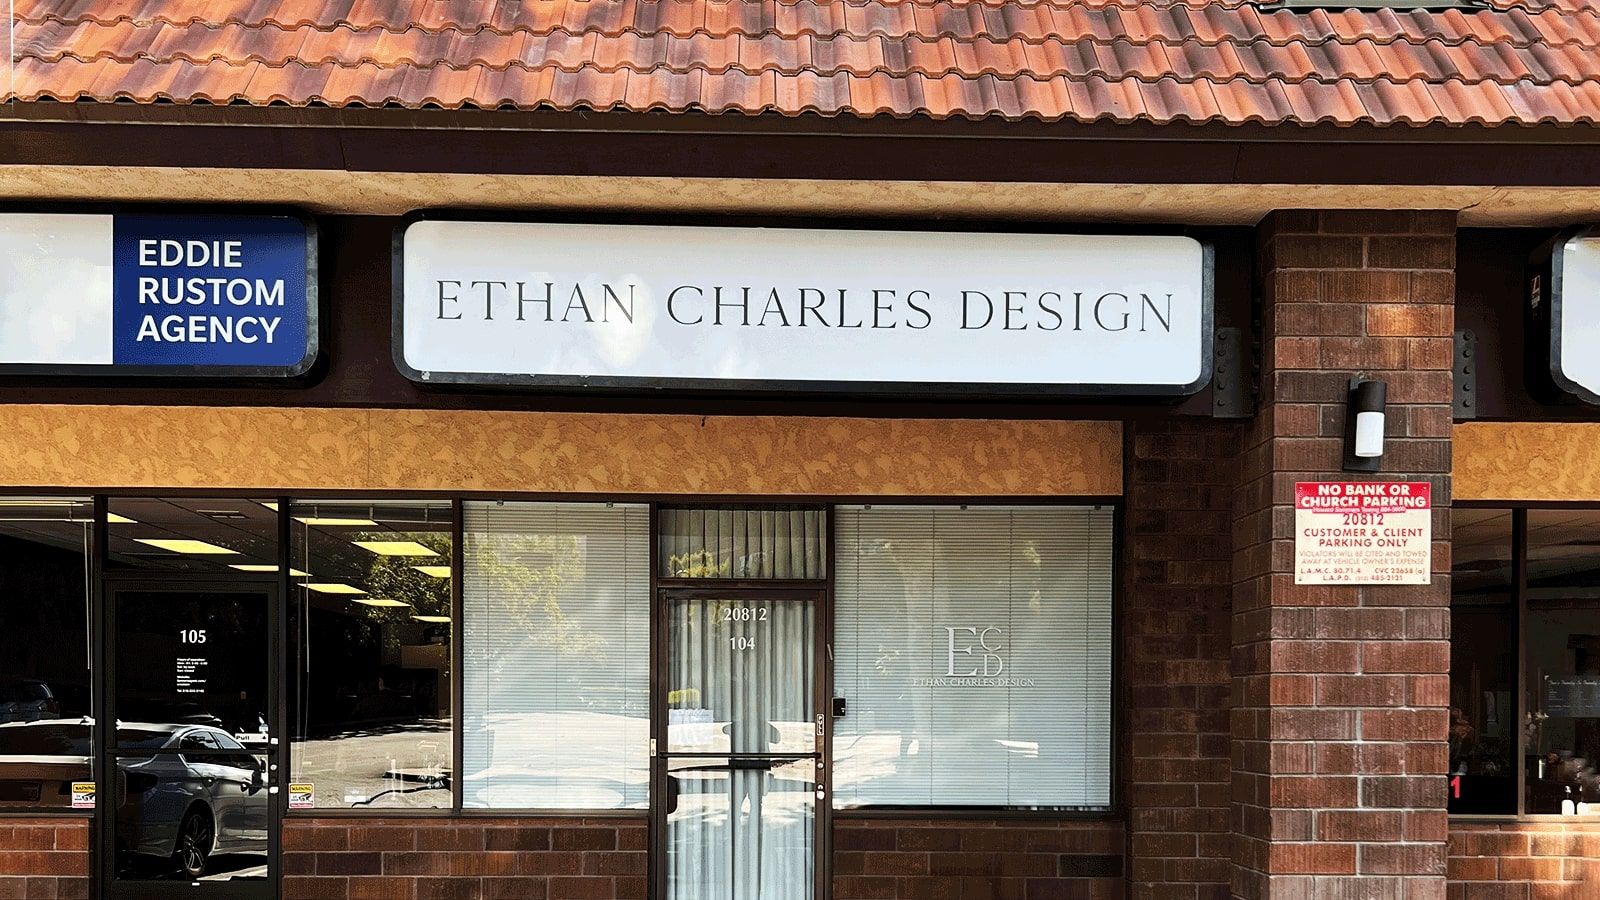 Ethan Charles Design light box sign installed on the facade